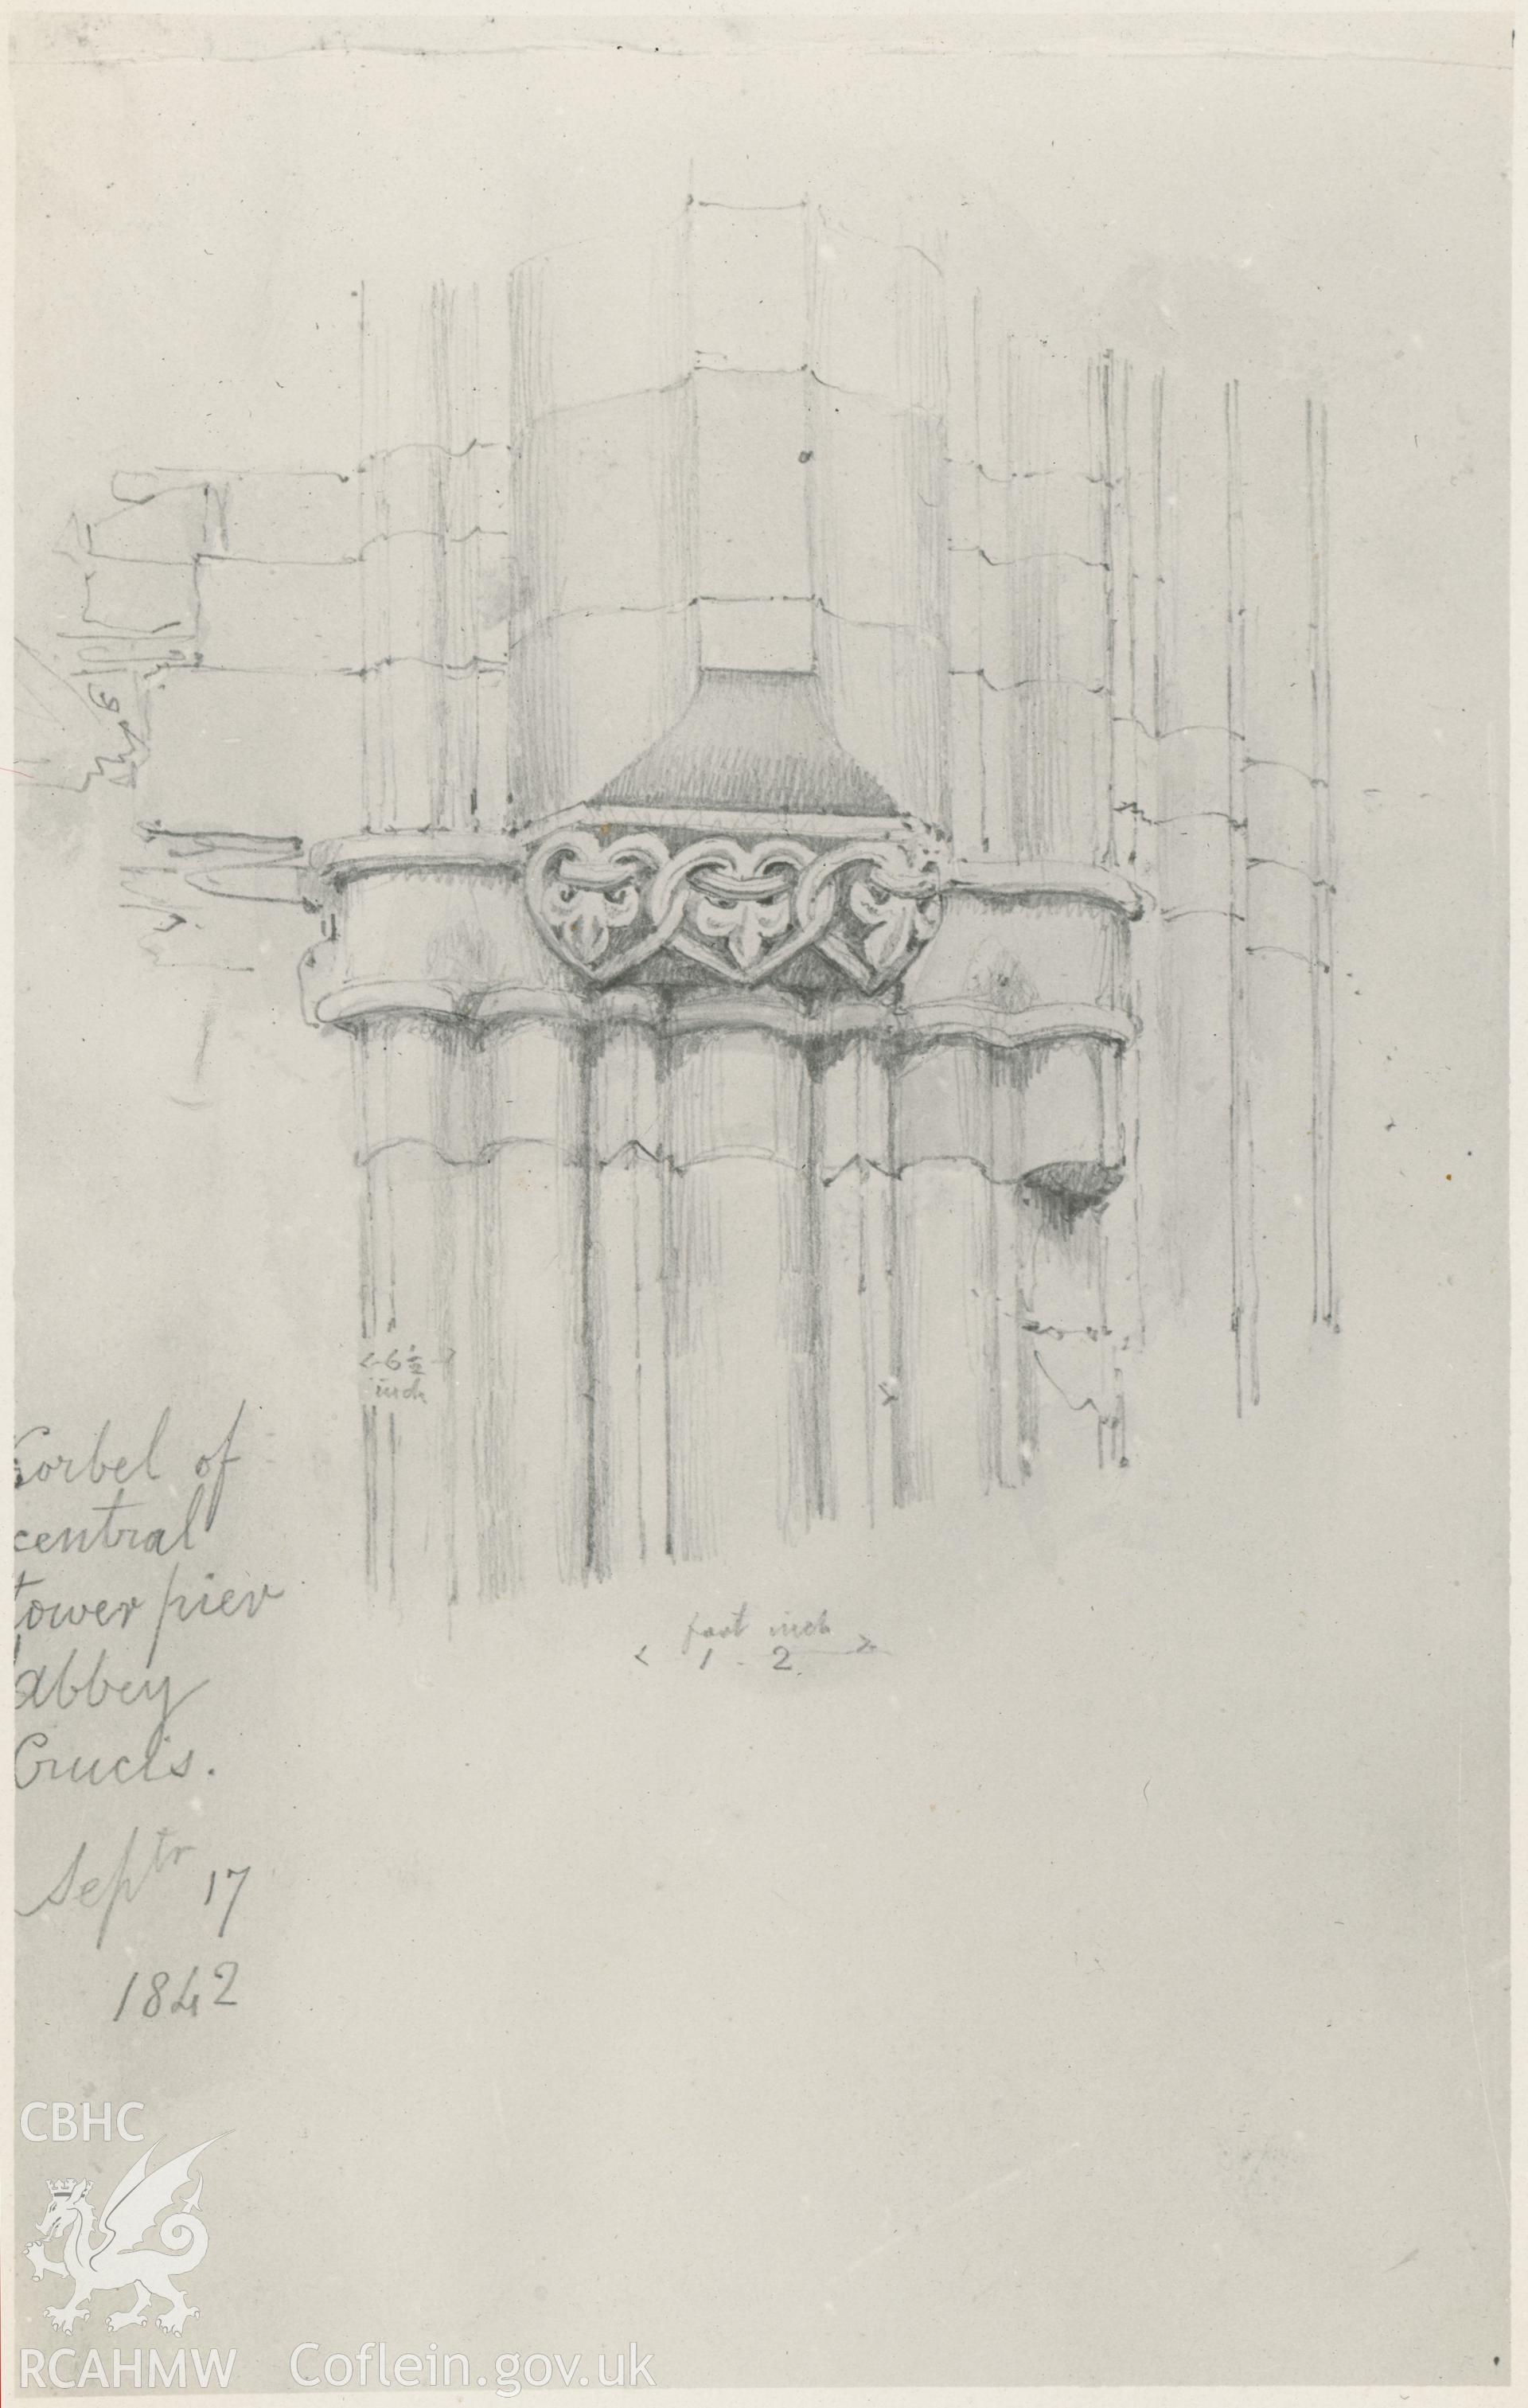 Photograph by Macbeth of an early sketch showing detail of corbel at Valle Crucis Abbey.